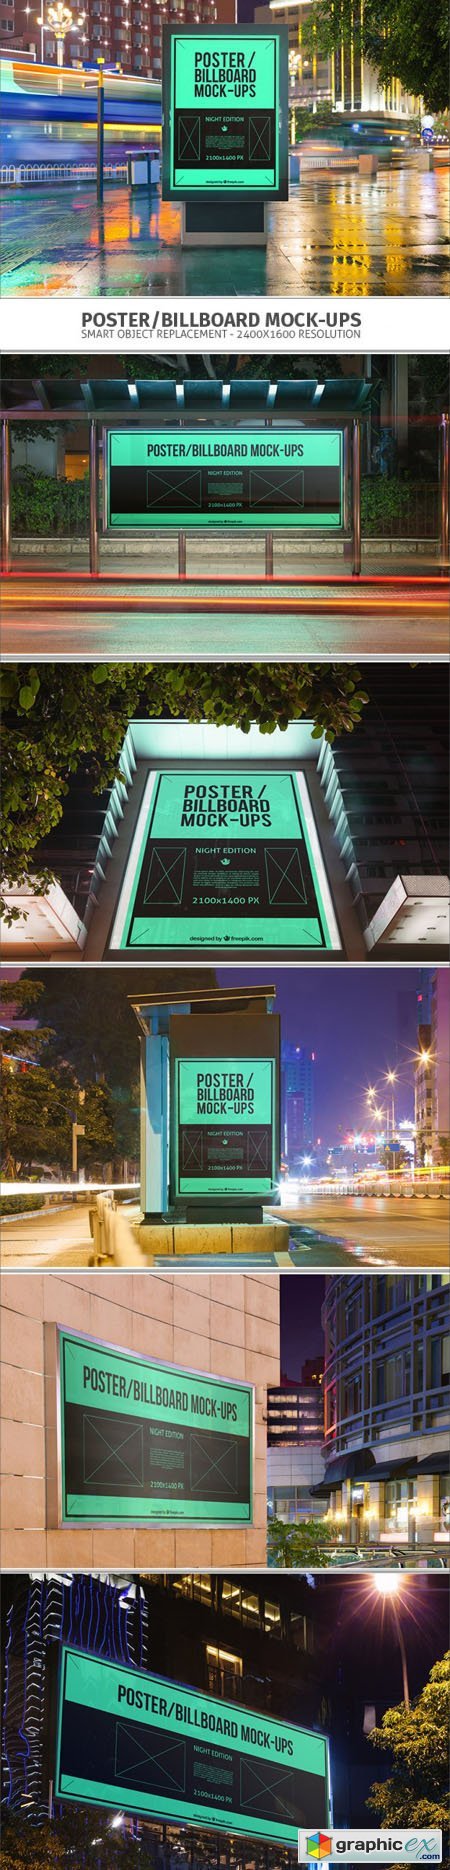 Advertising Billboard Posters Mock-up PSD Templates